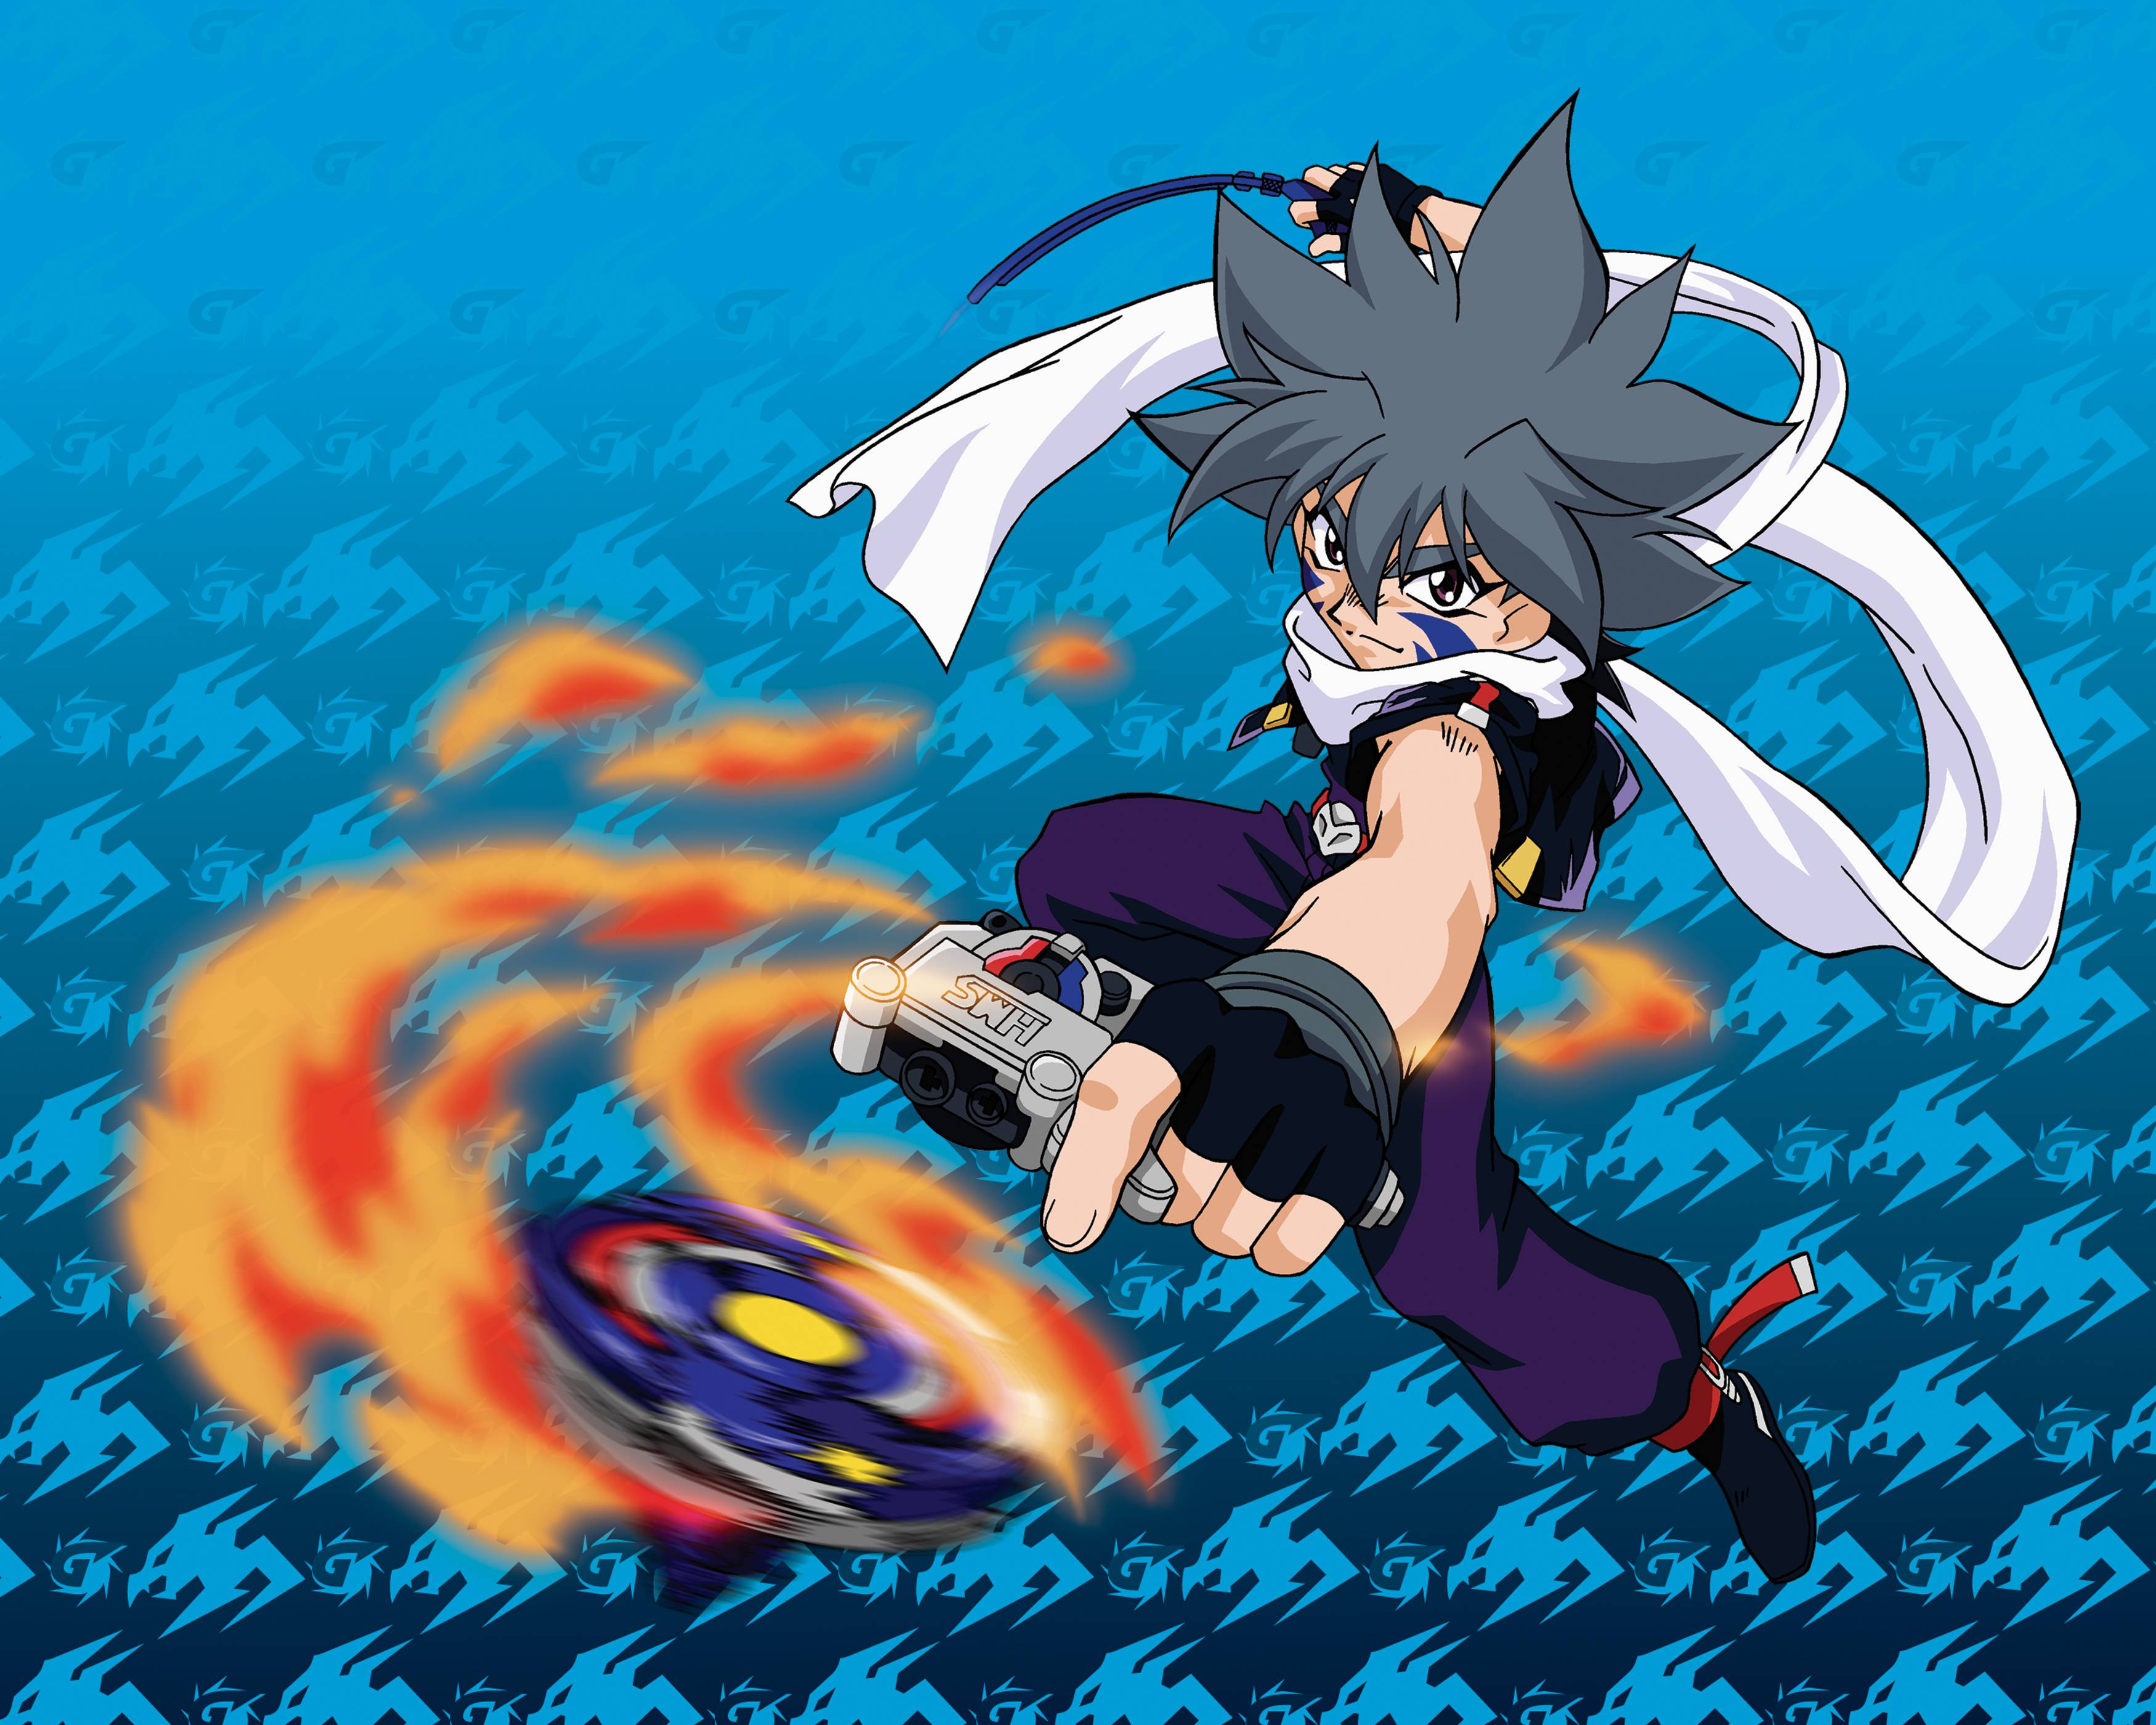 Beyblade Wallpapers - Wallpaper Cave